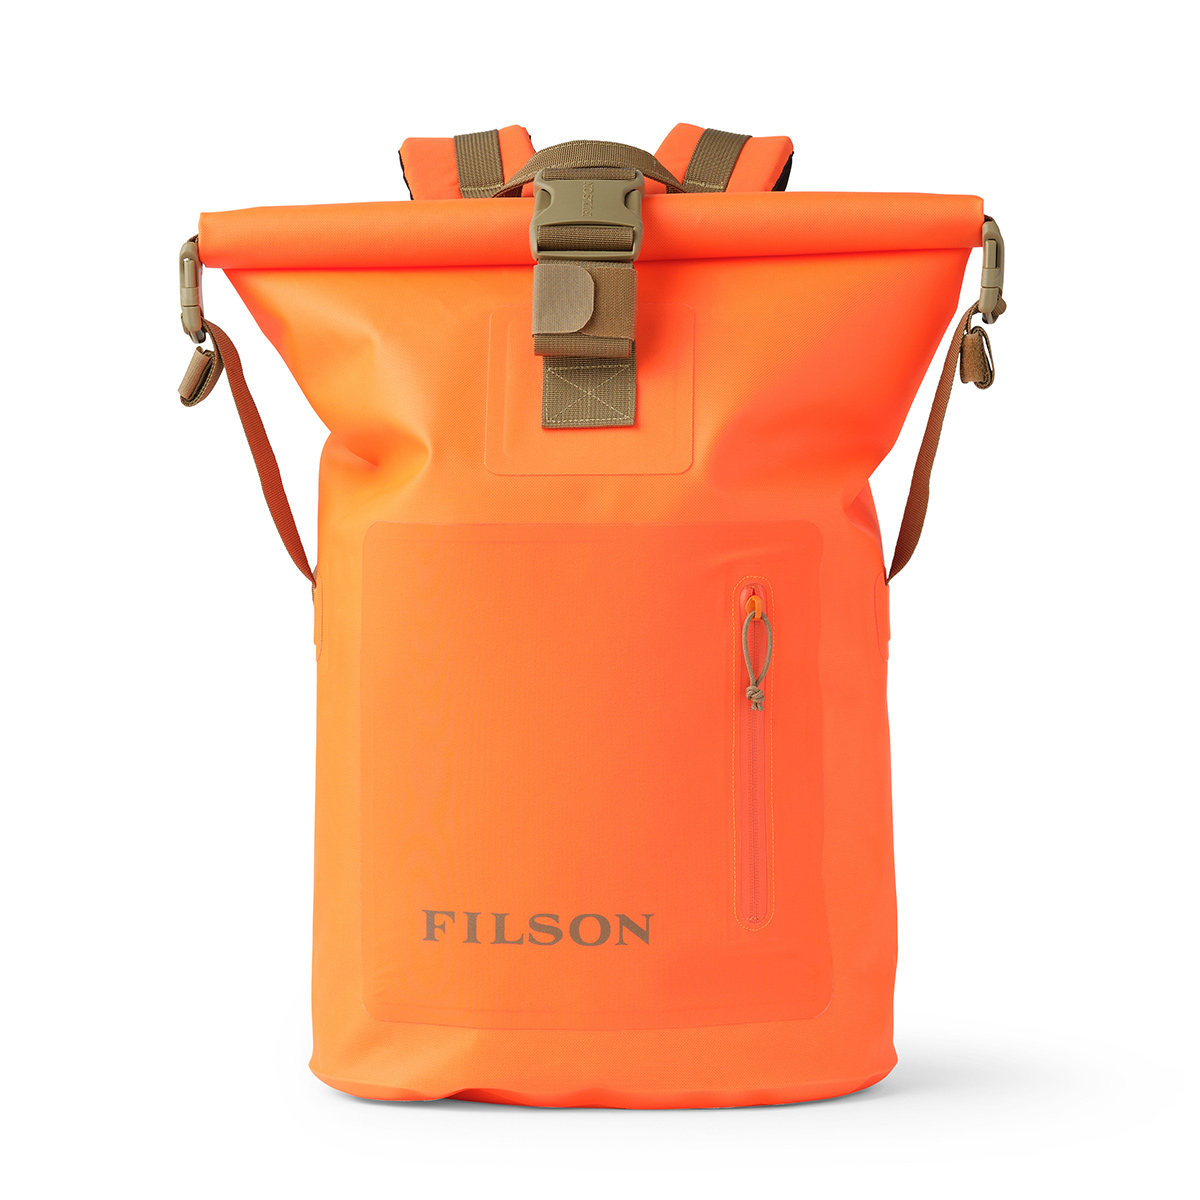 Filson Dry Backpack 20067743-Flame keeps your gear dry in any weather